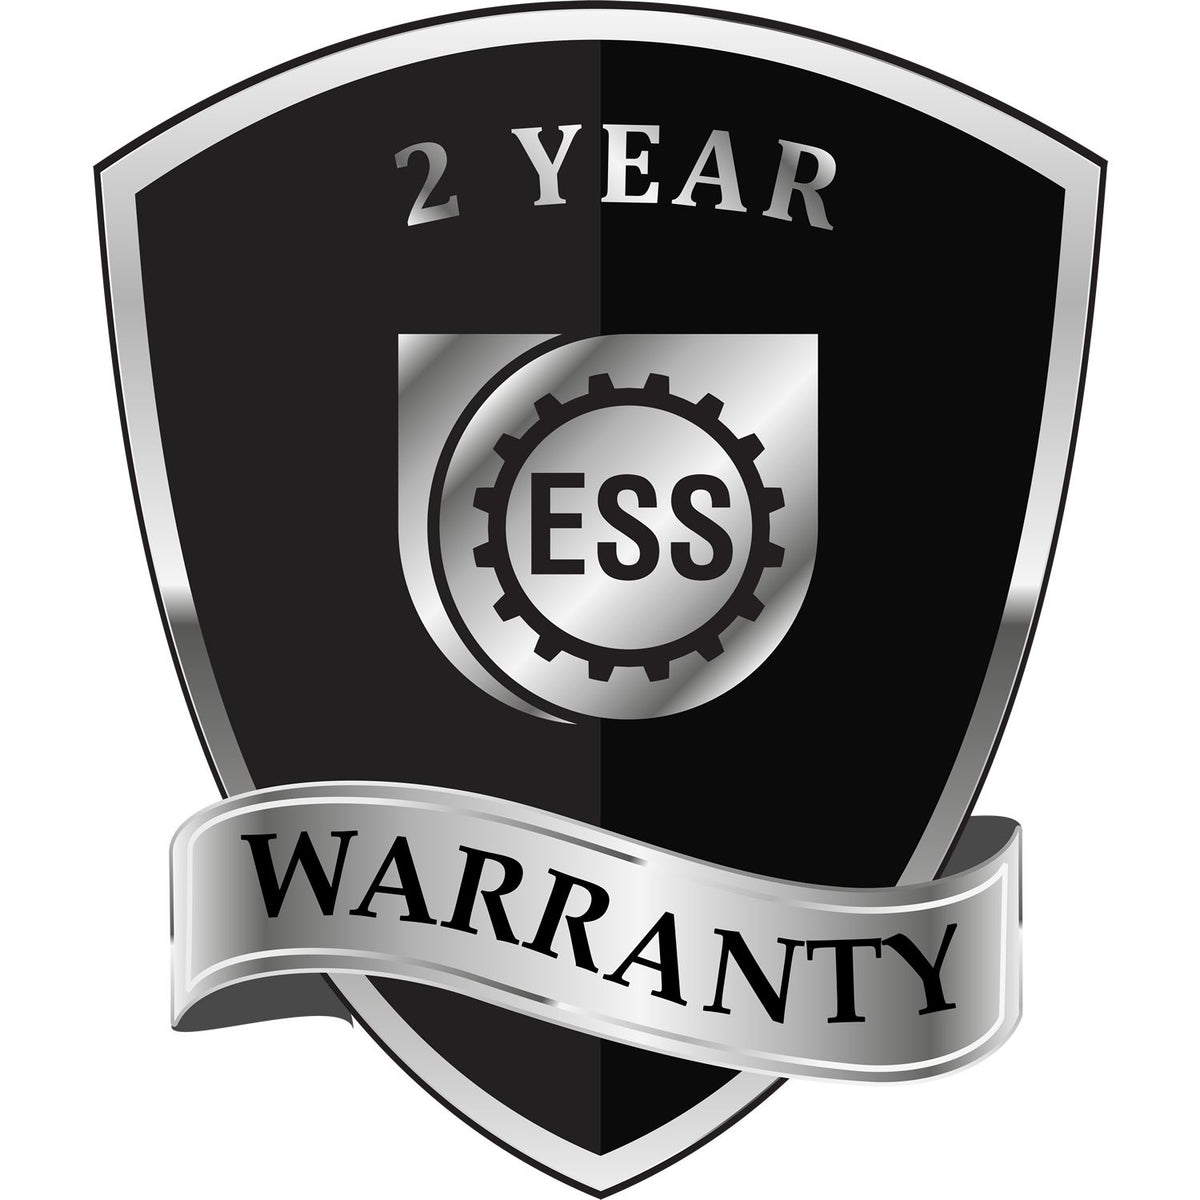 A badge or emblem showing a warranty icon for the Extended Long Reach Wyoming Architect Seal Embosser